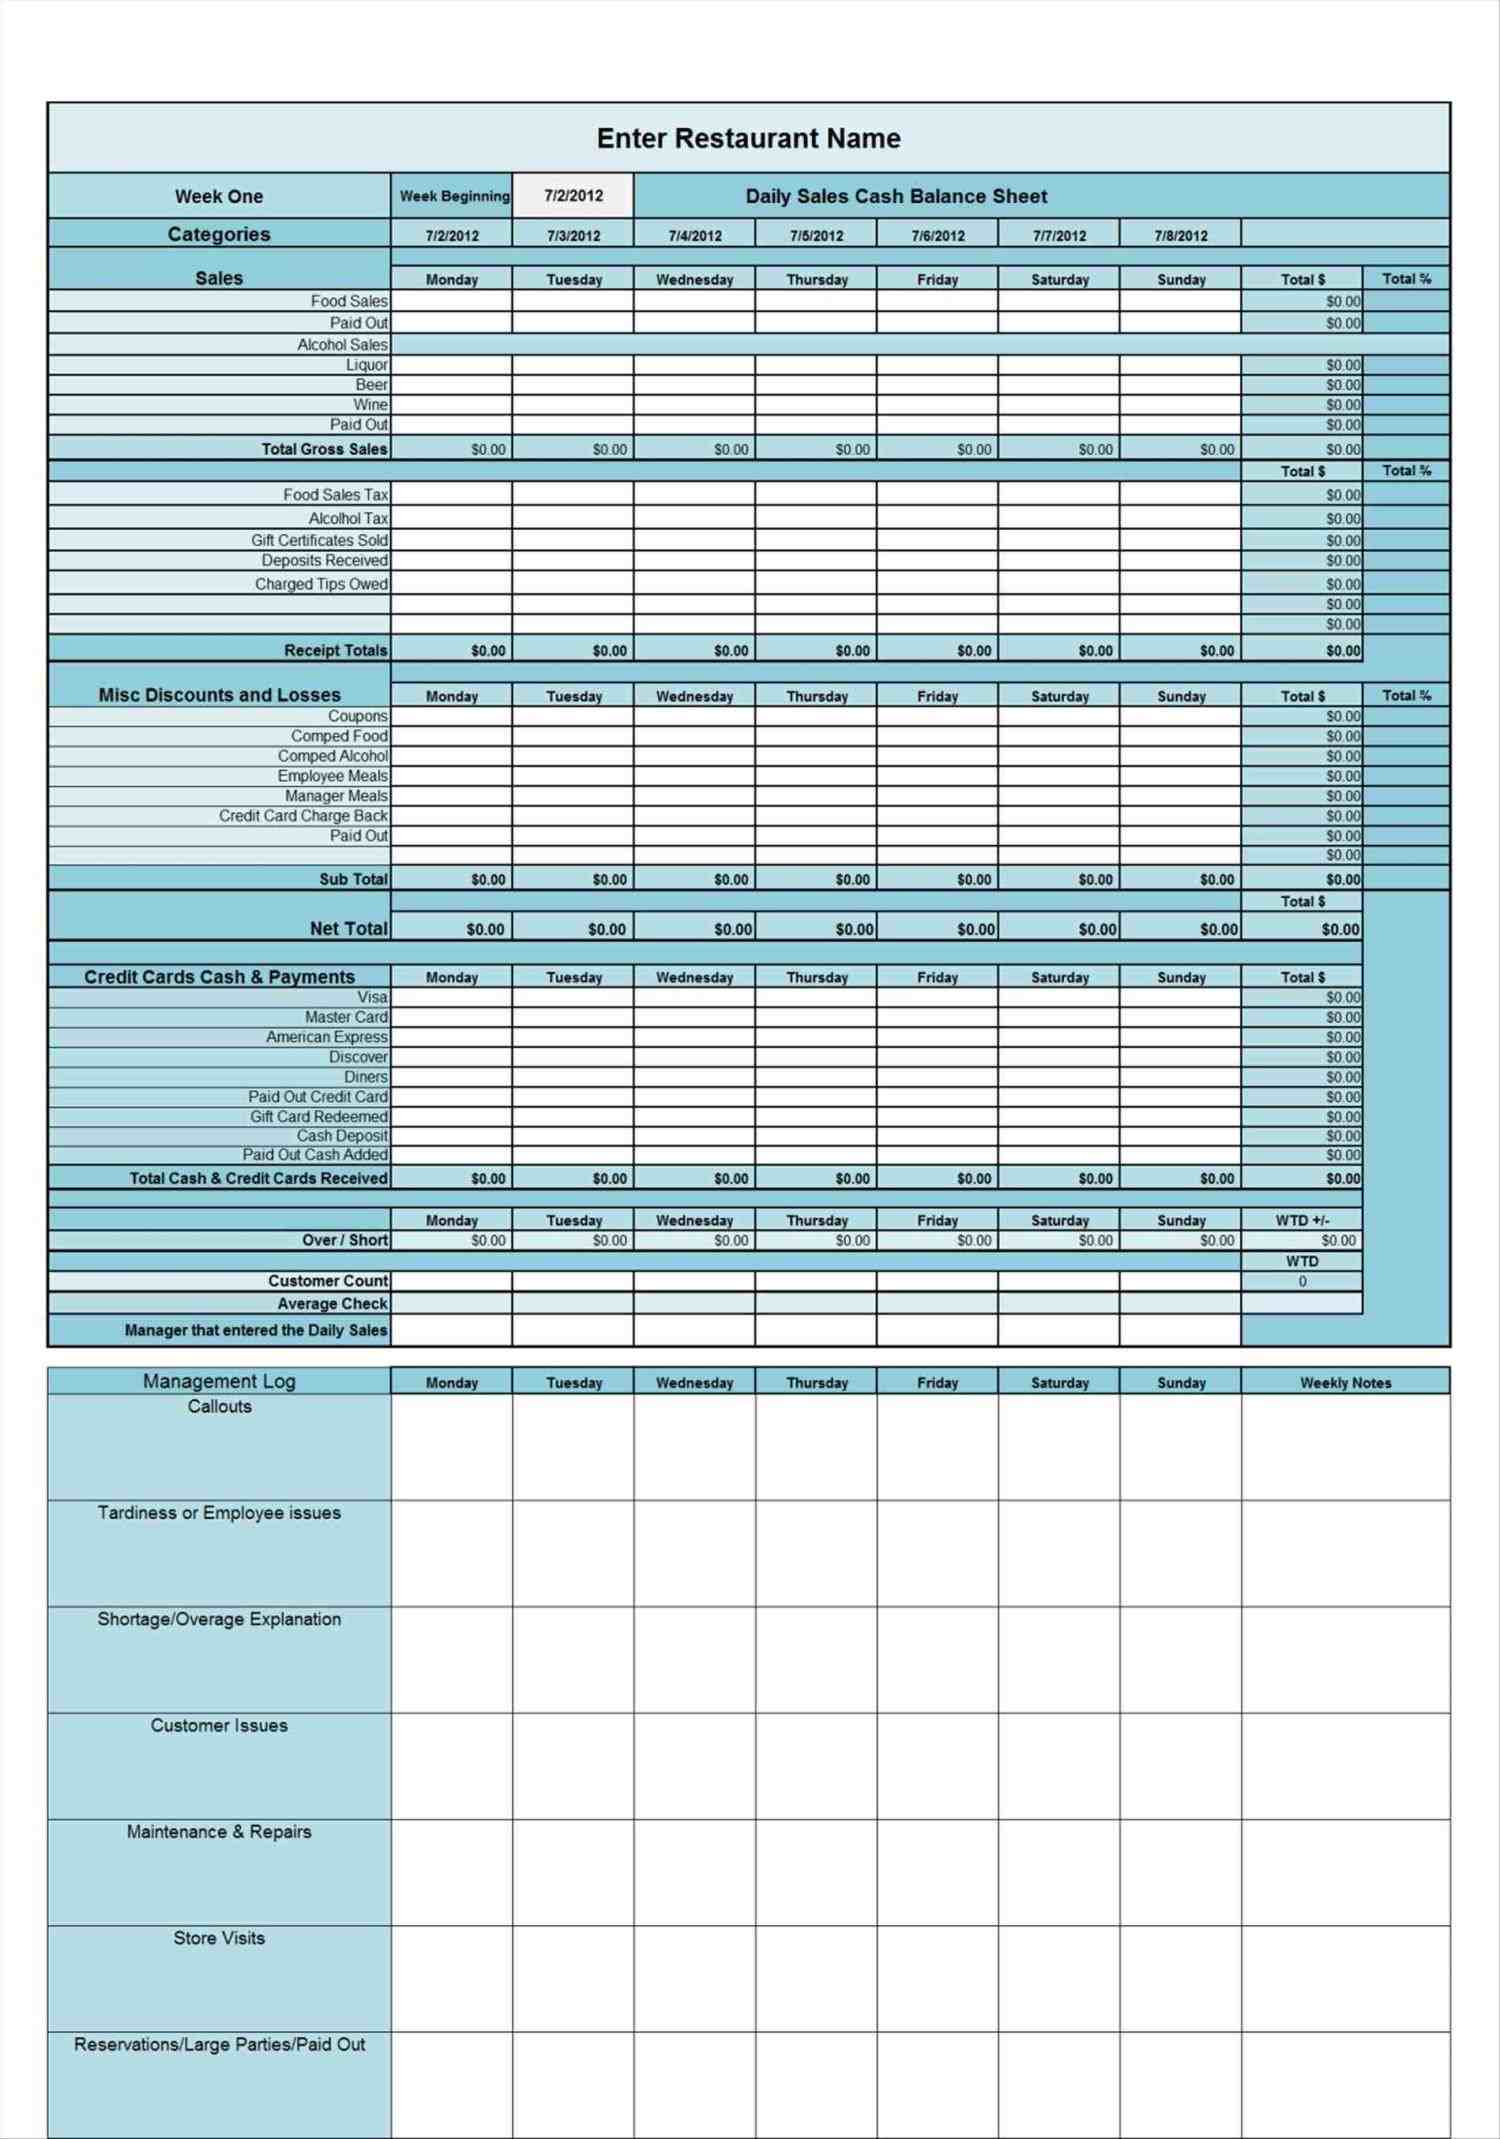 revenue spreadsheet exltemplates pretty sales weekly report template contemporary professional pretty Daily Revenue Spreadsheet sales weekly report template contemporary professional